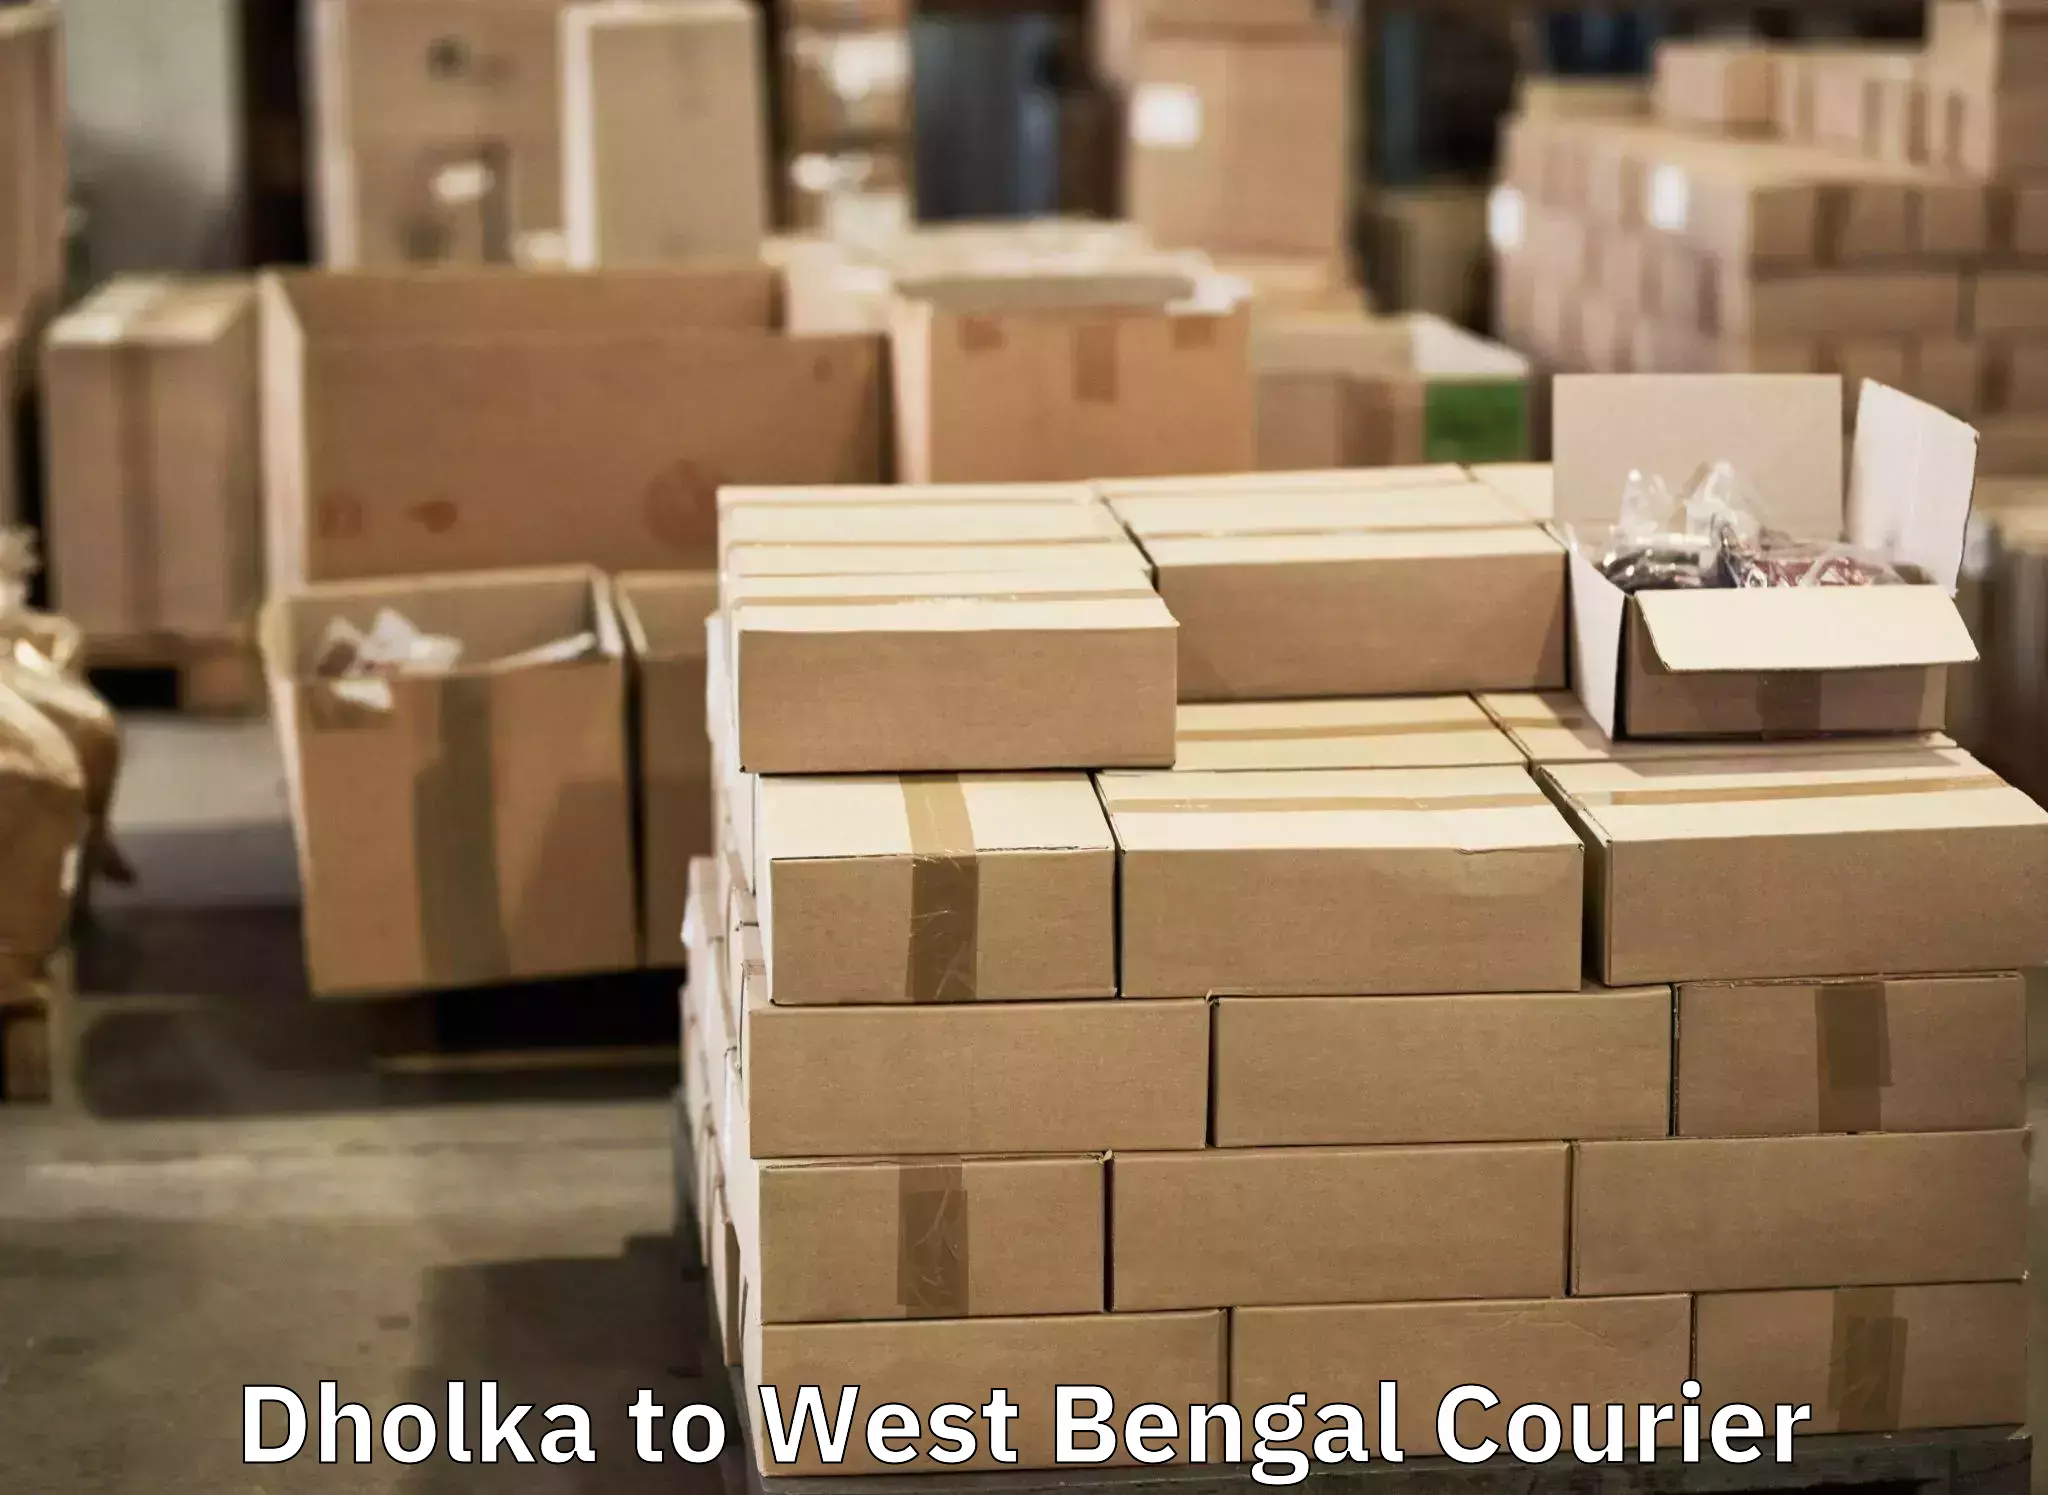 Luggage dispatch service Dholka to Barrackpore